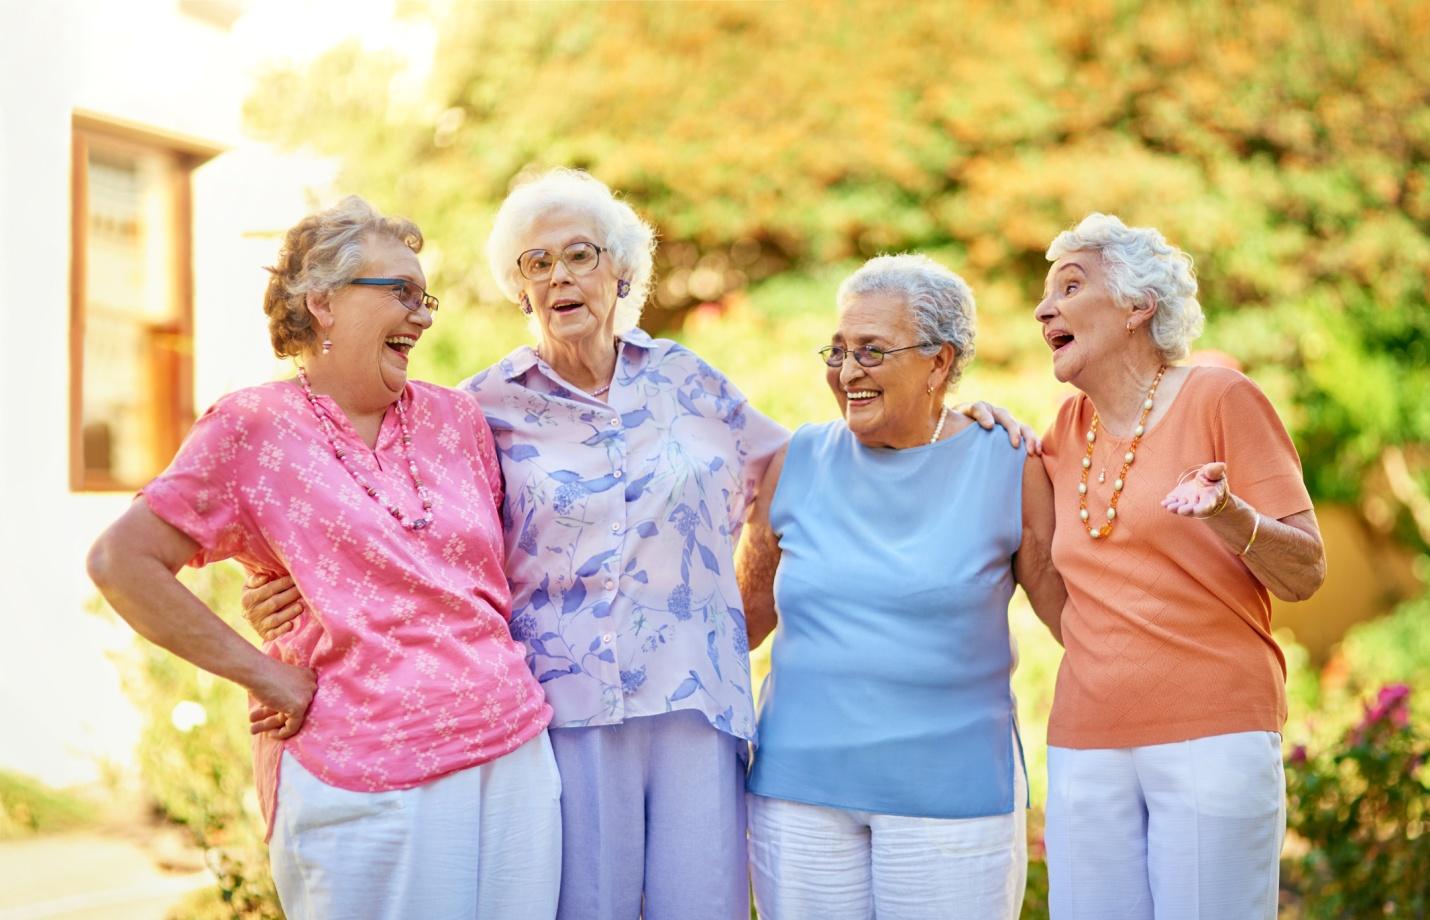 Video: What is Included in a Senior Living Community? | Senior Lifestyle